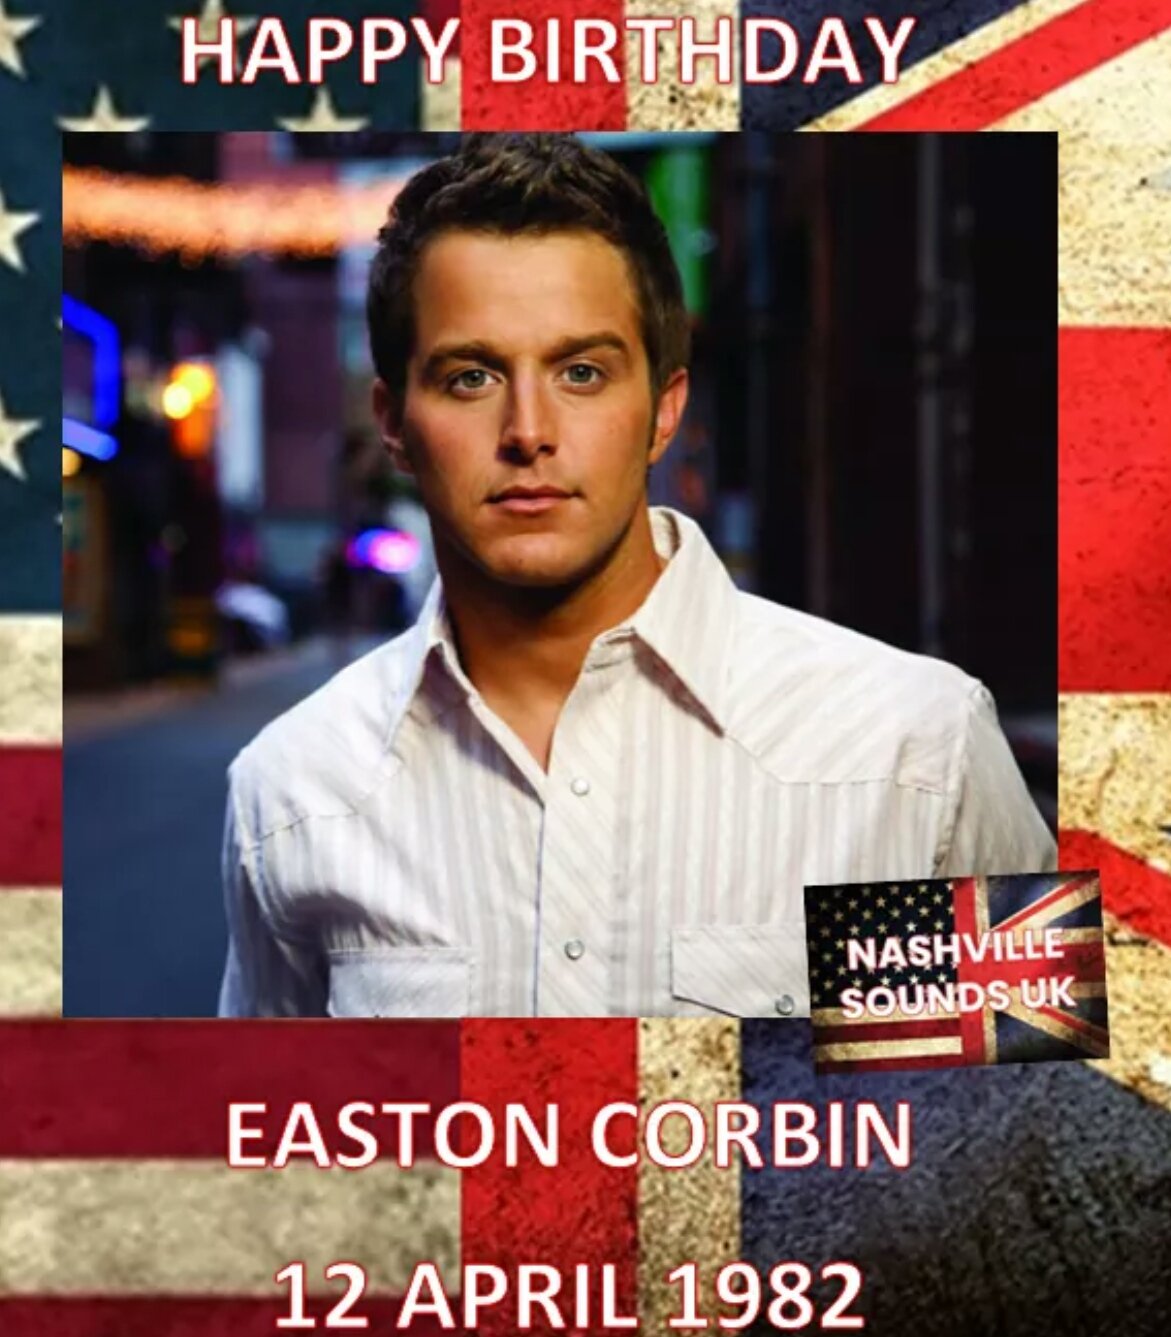 Happy Birthday to Easton Corbin   The Floridian has so far had 2 Number 1s and four top ten songs. 